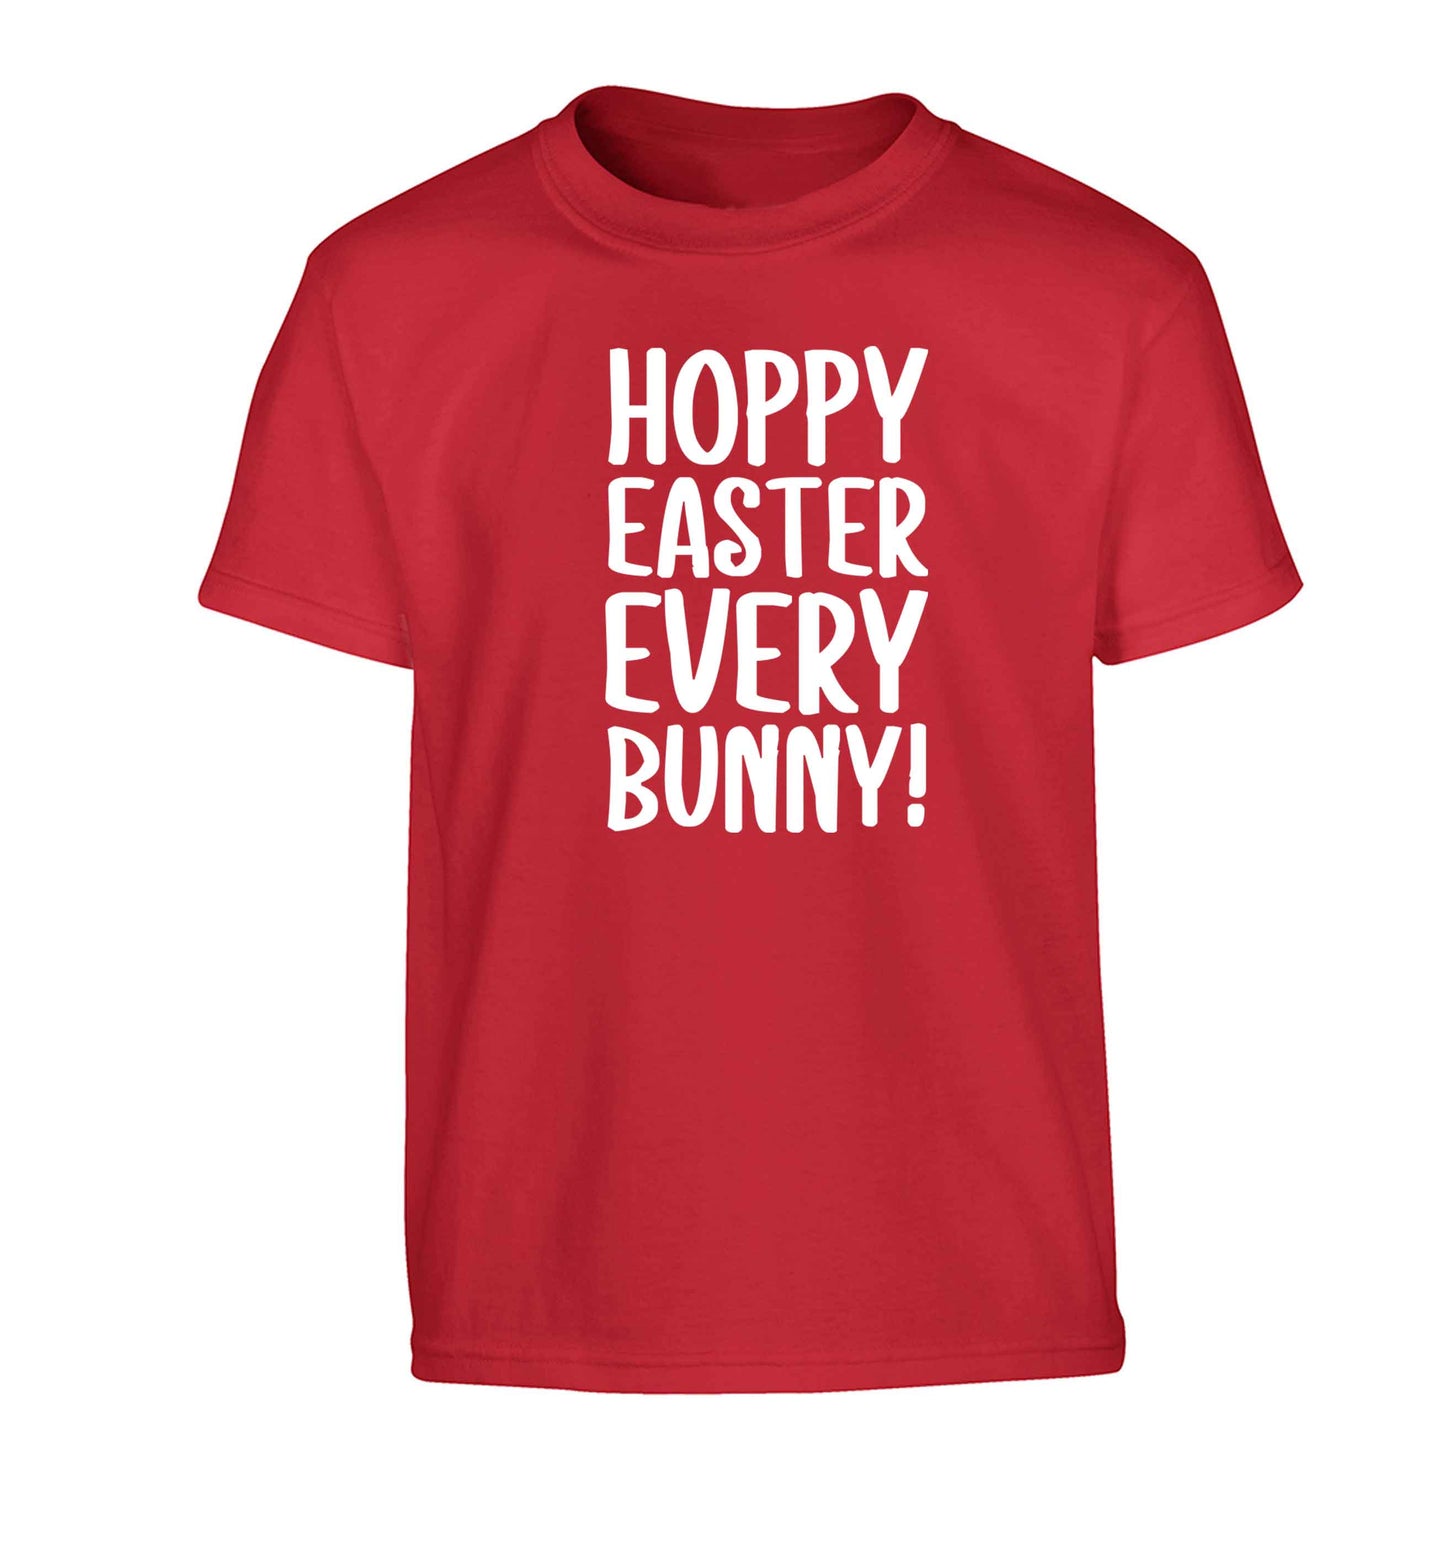 Hoppy Easter every bunny! Children's red Tshirt 12-13 Years